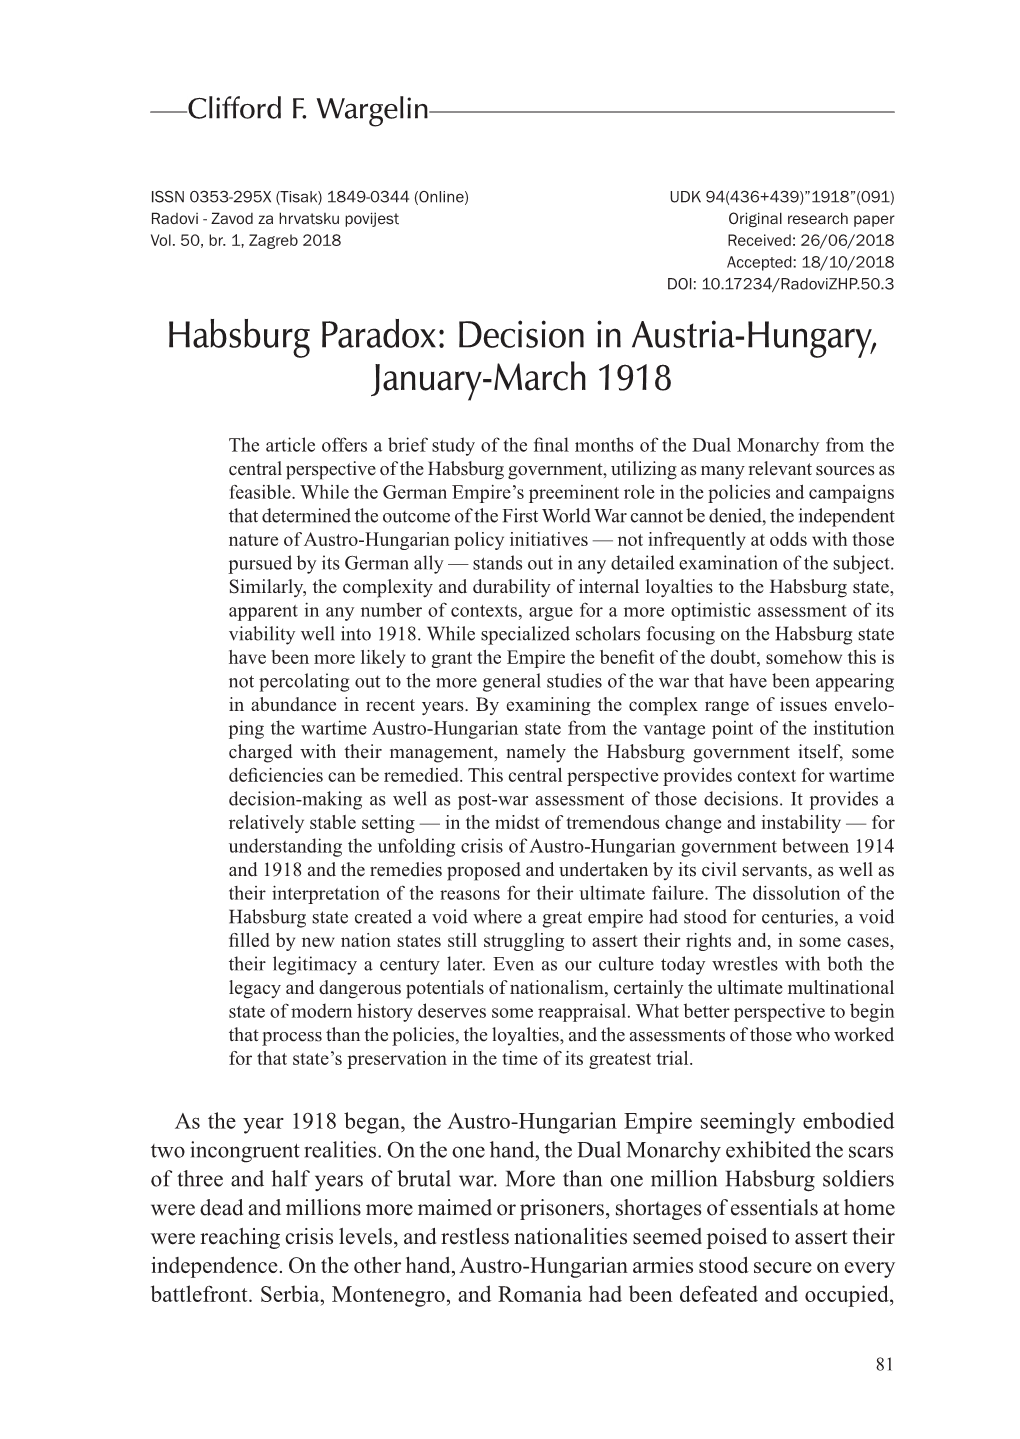 Habsburg Paradox: Decision in Austria-Hungary, January-March 1918